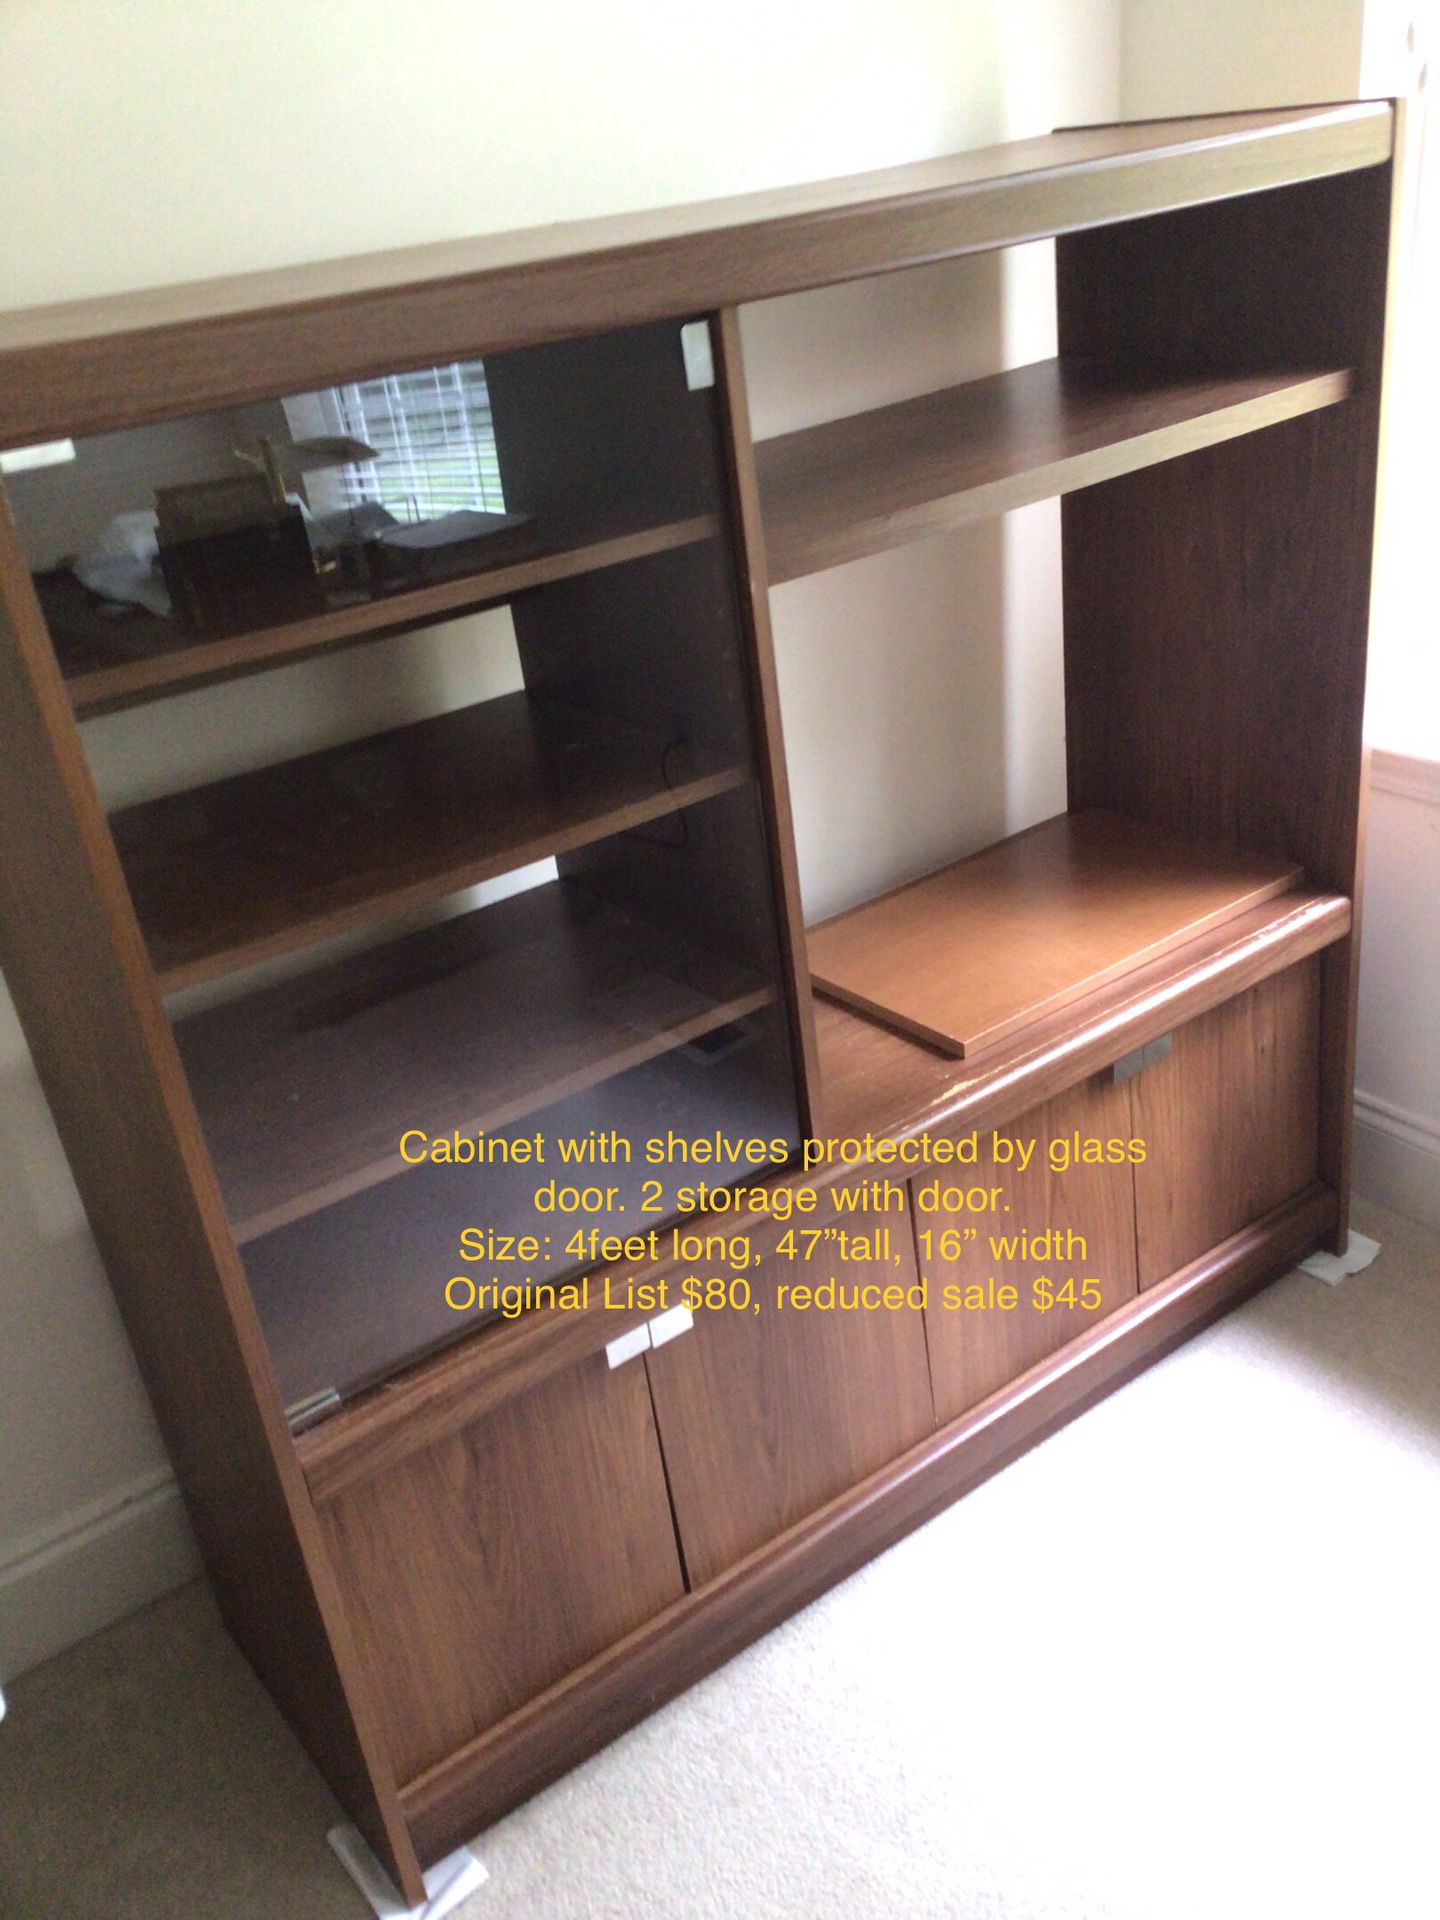 Book shelf w/storage, desks with shelves and storage, class door cabinet, make your reasonable offer I can’t refuse!  Special bonus, buy one of three 